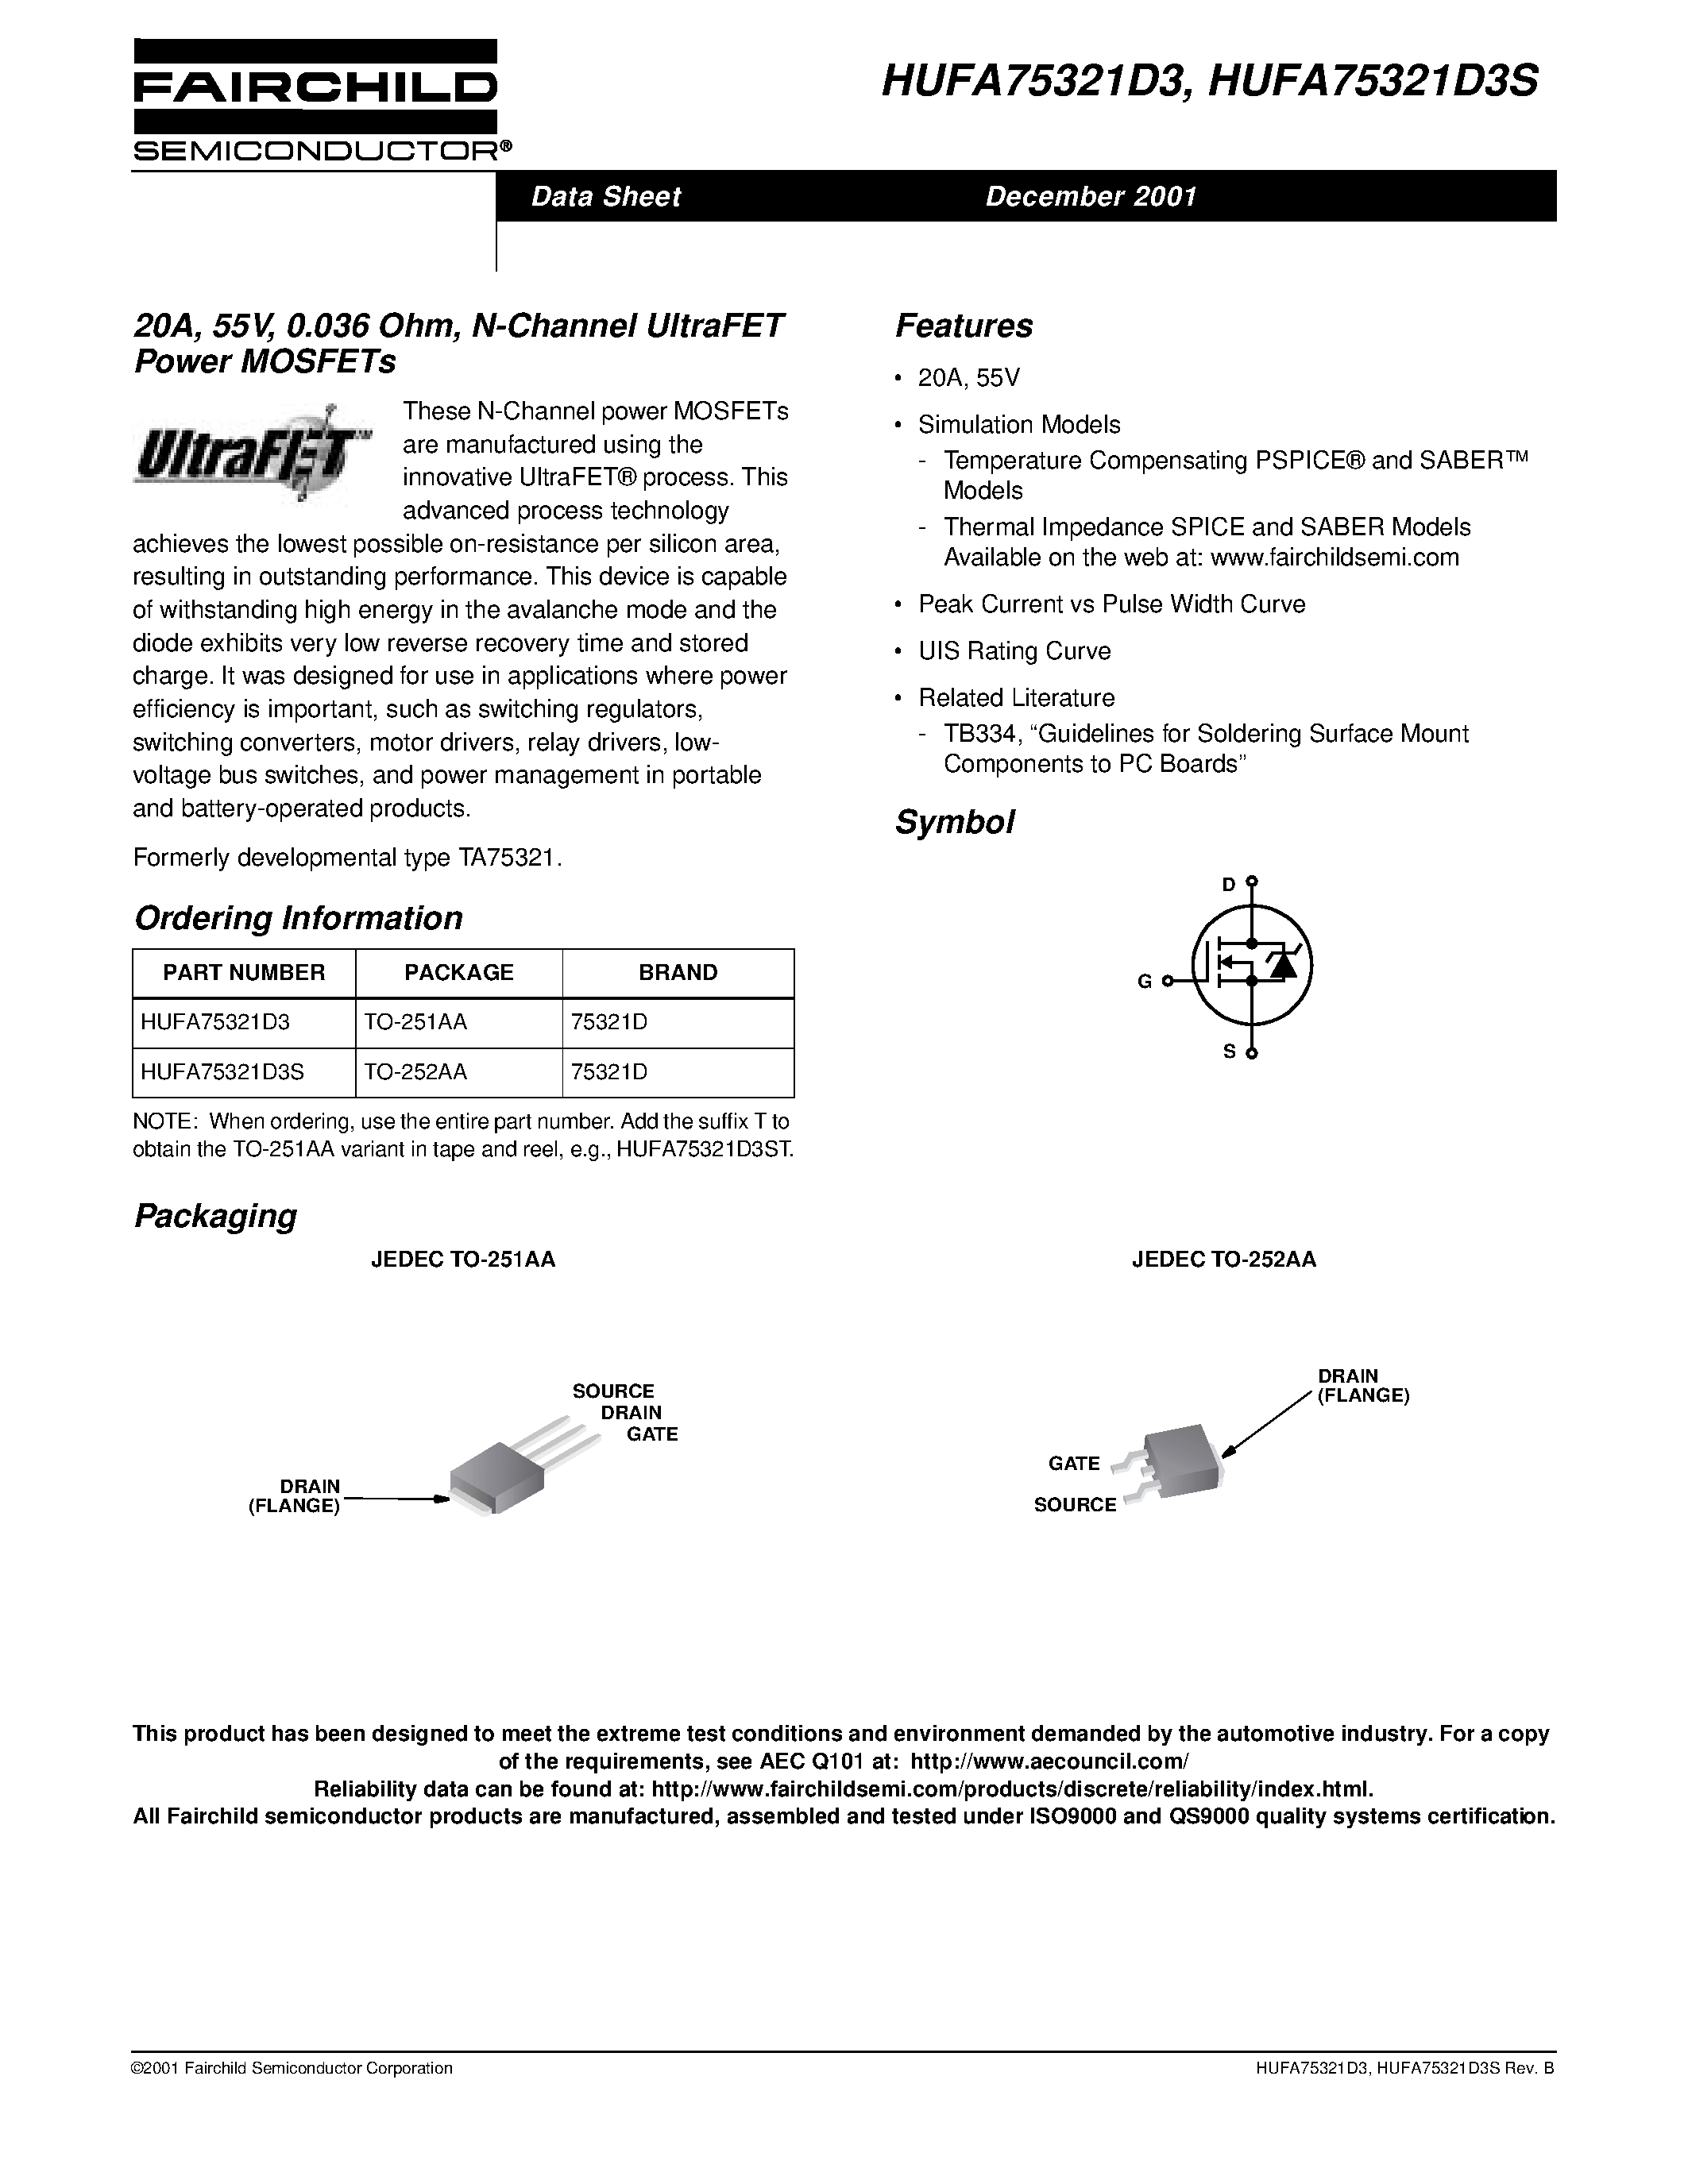 Datasheet HUFA75321D3 - 20A/ 55V/ 0.036 Ohm/ N-Channel UltraFET Power MOSFETs page 1